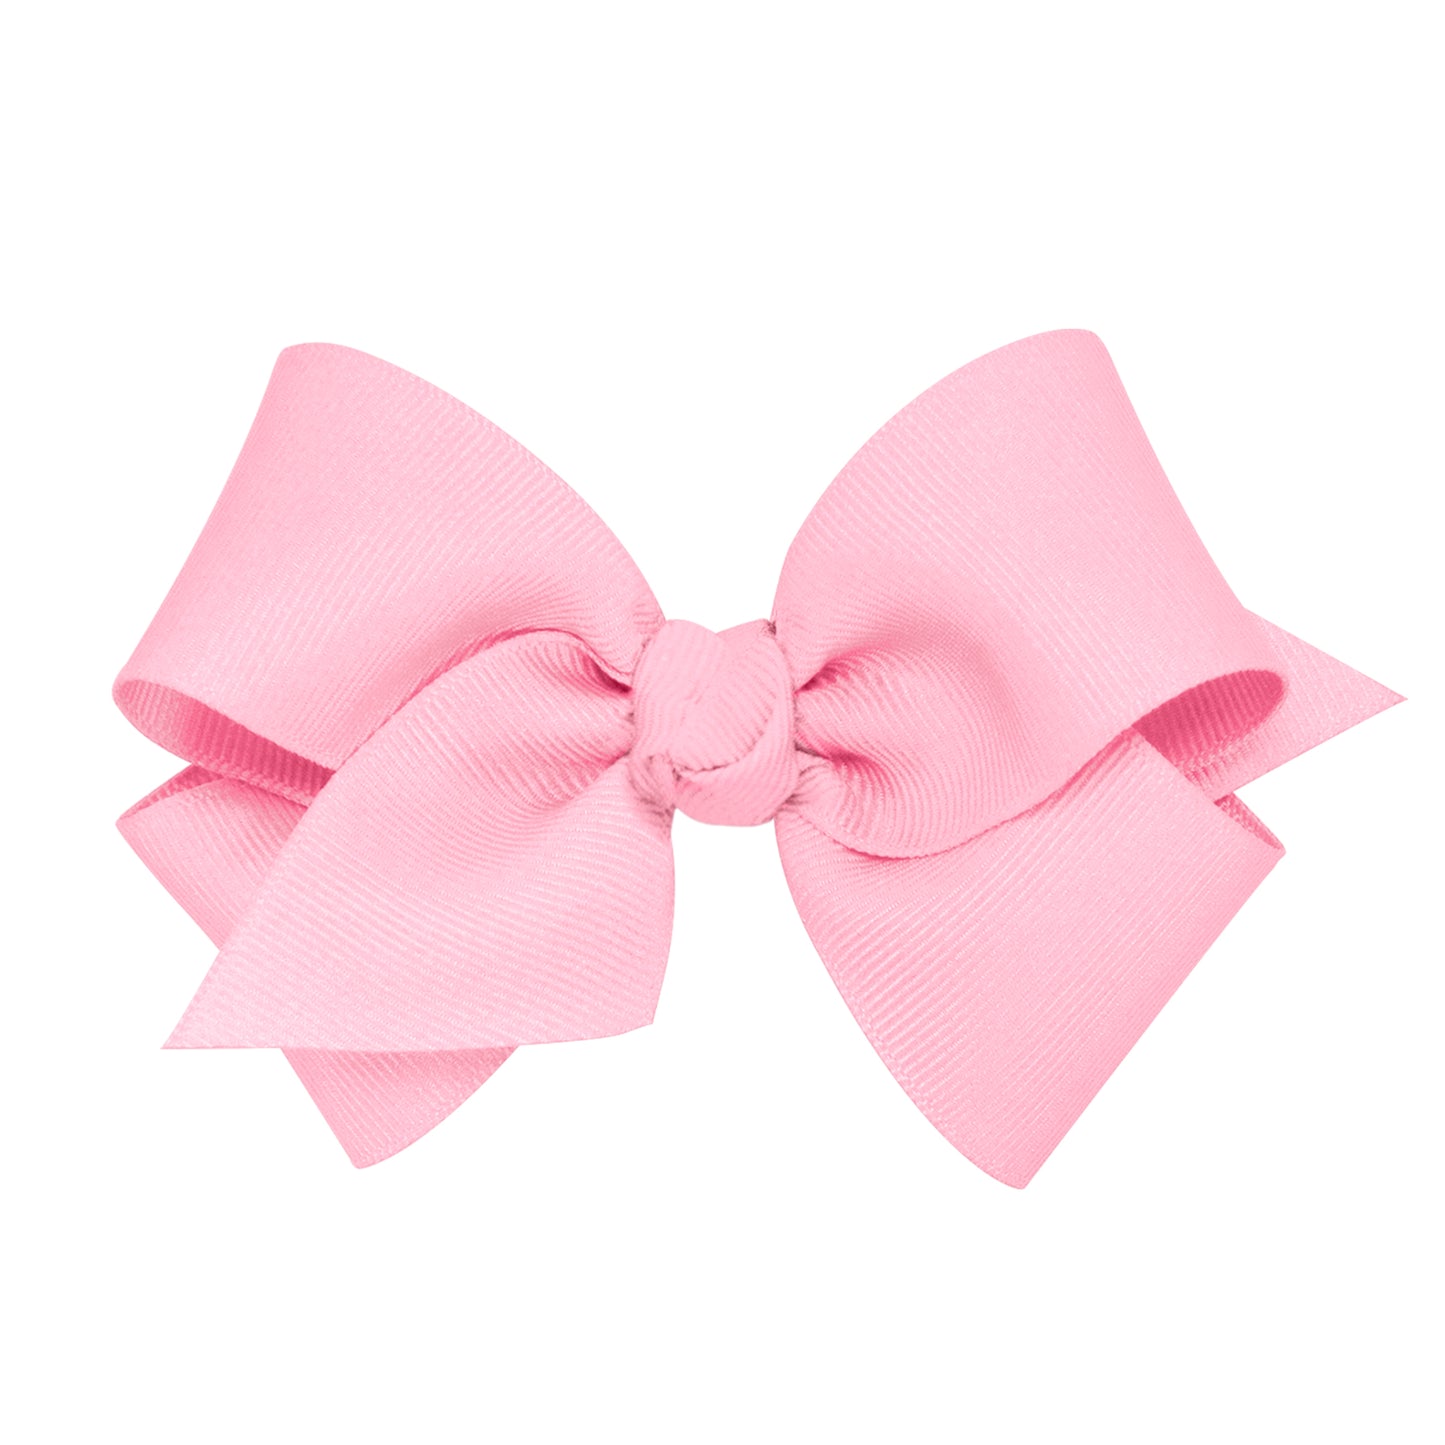 Small Grosgrain Hair Bow with Center Knot - Pearl Pink